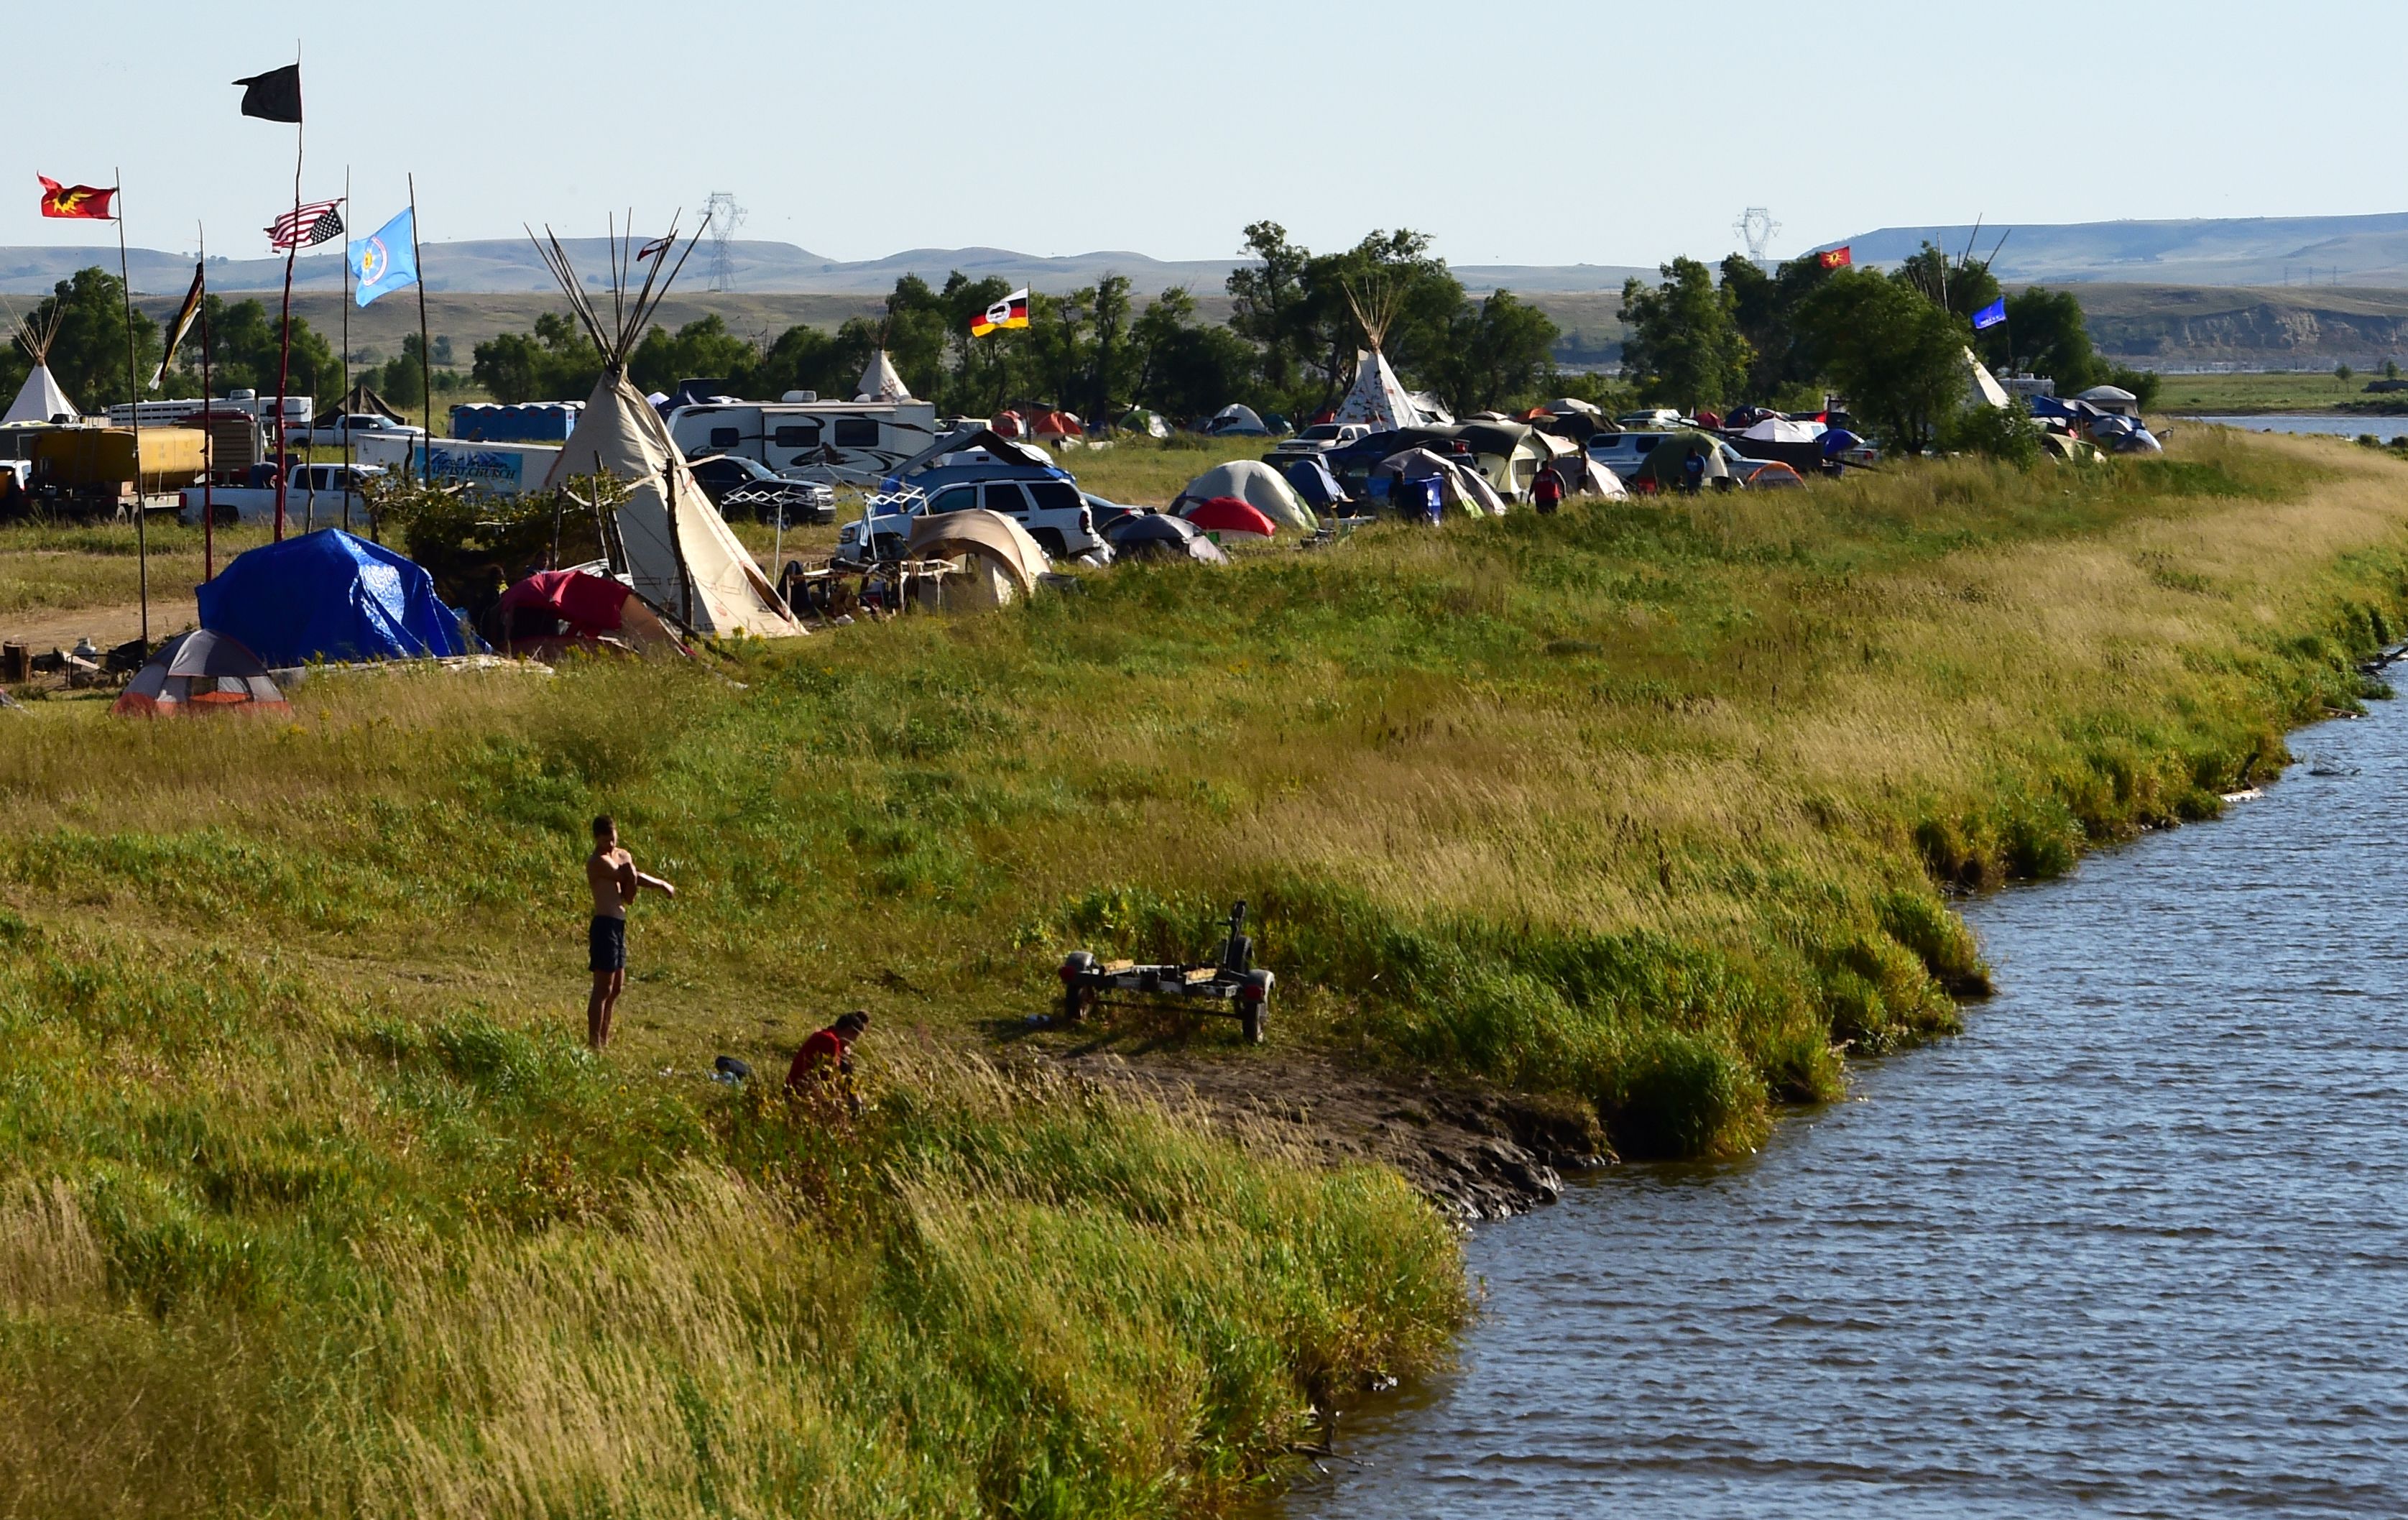 A view of a protest encampment near Cannon Ball, North Dakota where members of some 200 Native American tribes from across the U.S. and Canada have gathered to lend their support to the Standing Rock Sioux Tribe's opposition to the Dakota Access Pipeline on Sept. 3, 2016. (Robyn Beck—AFP/Getty Images)